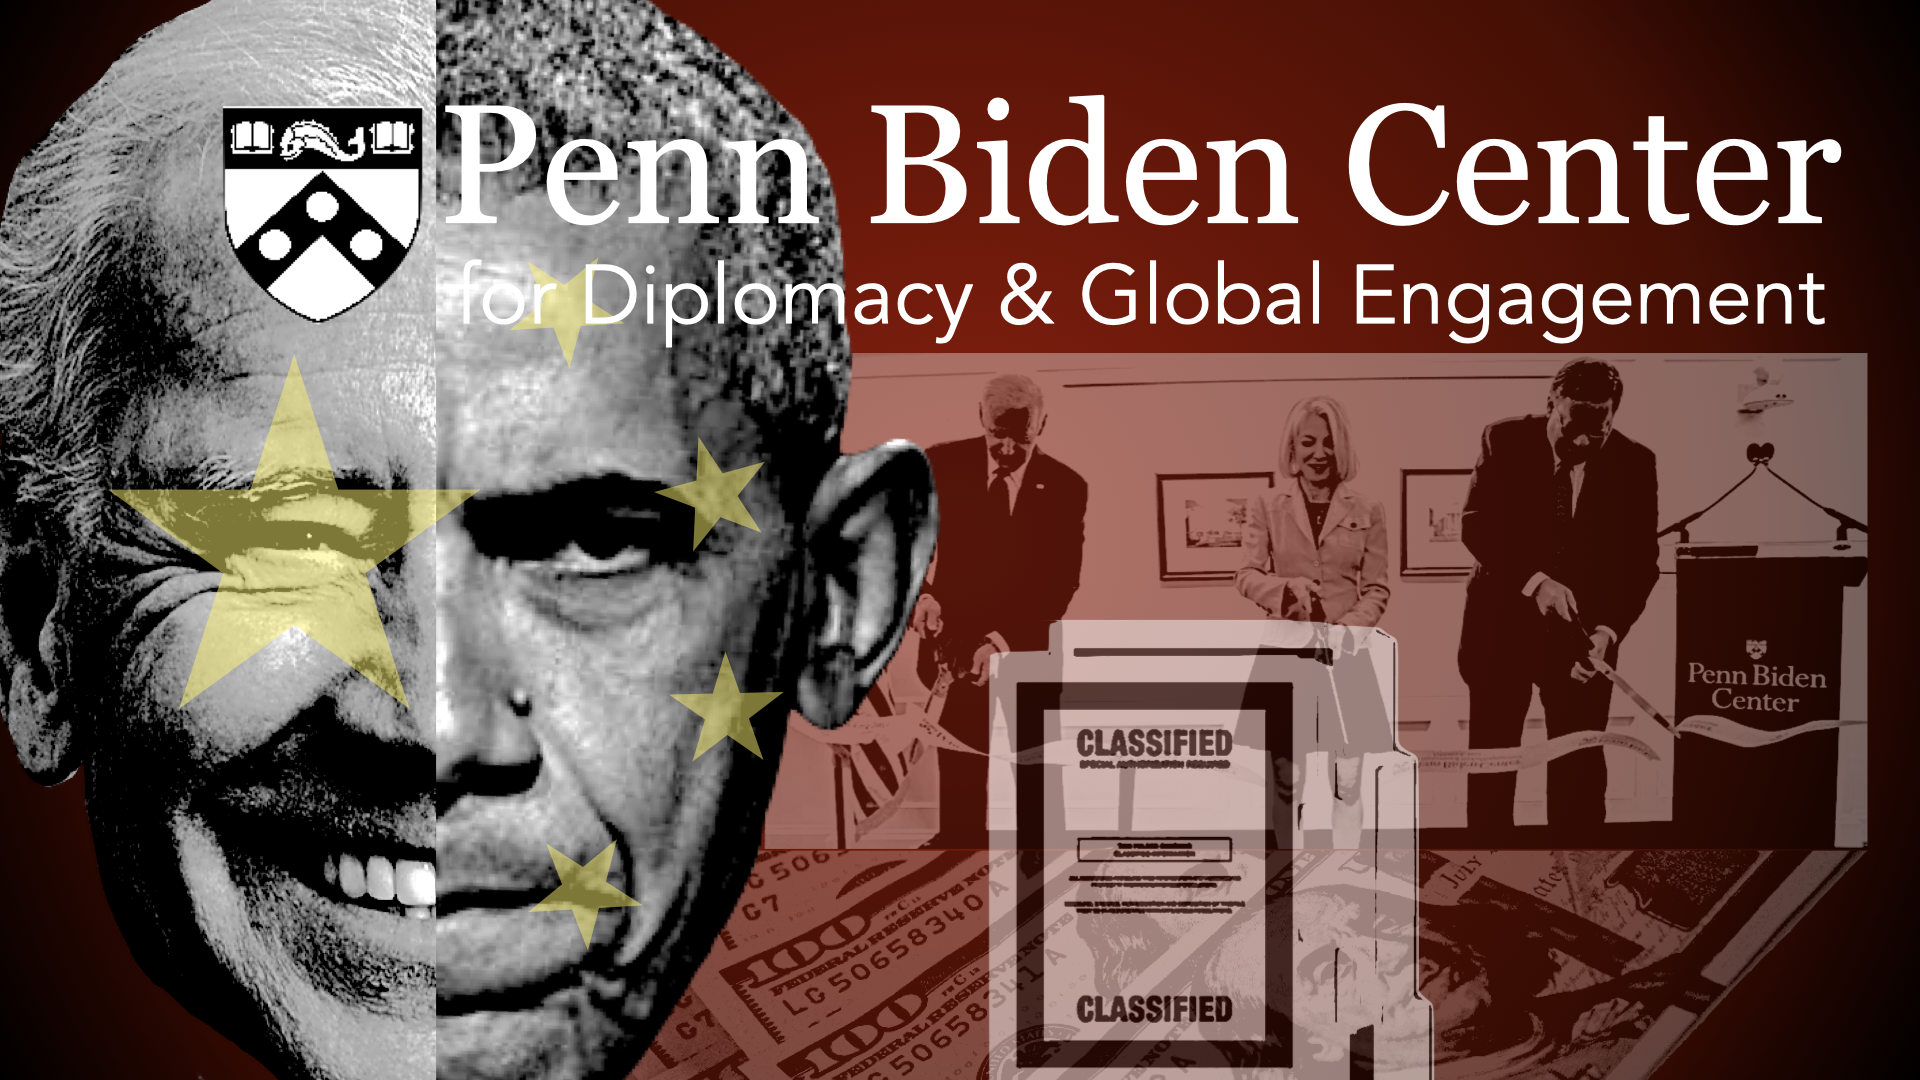 China, Cash and Classified Documents: FISC/FISA, the Usual Suspects and the Problematic Penn Biden Center